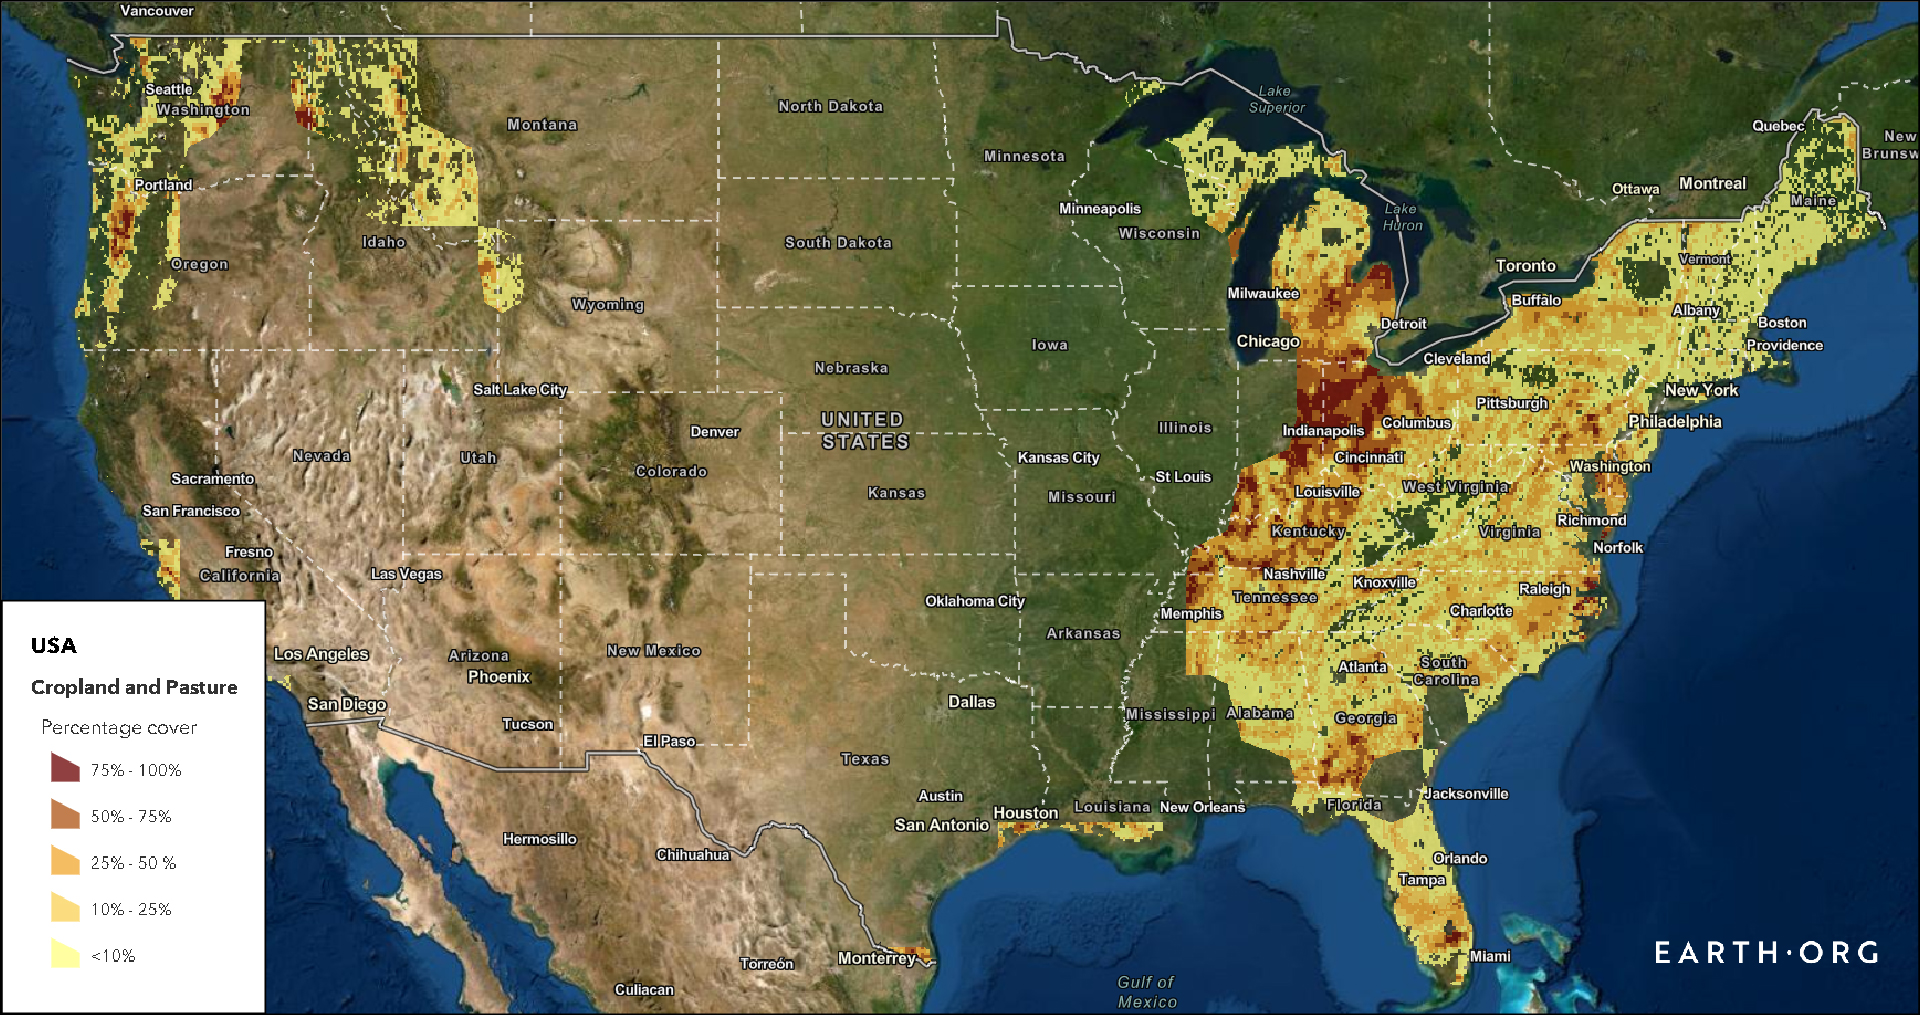 USA corn soybean agriculture food hotspots climate change